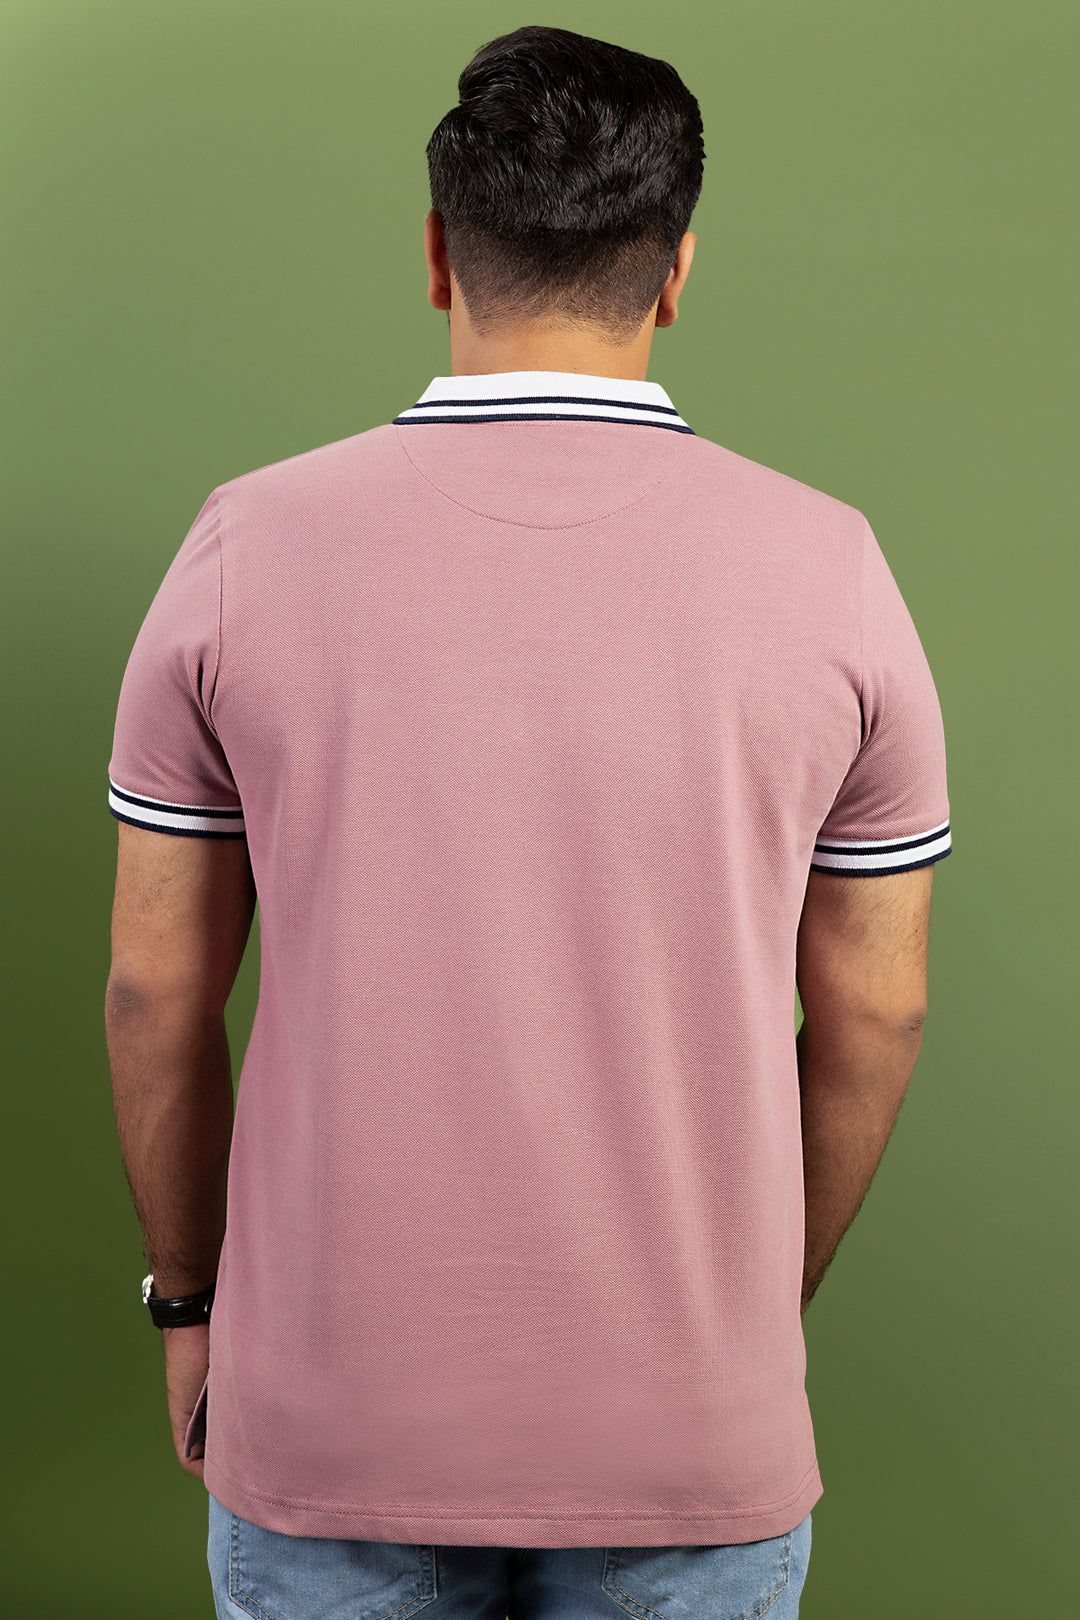 Rusty Pink Yarn Dyed Collar Polo Shirt (Plus Size) - S23 - MP0225P